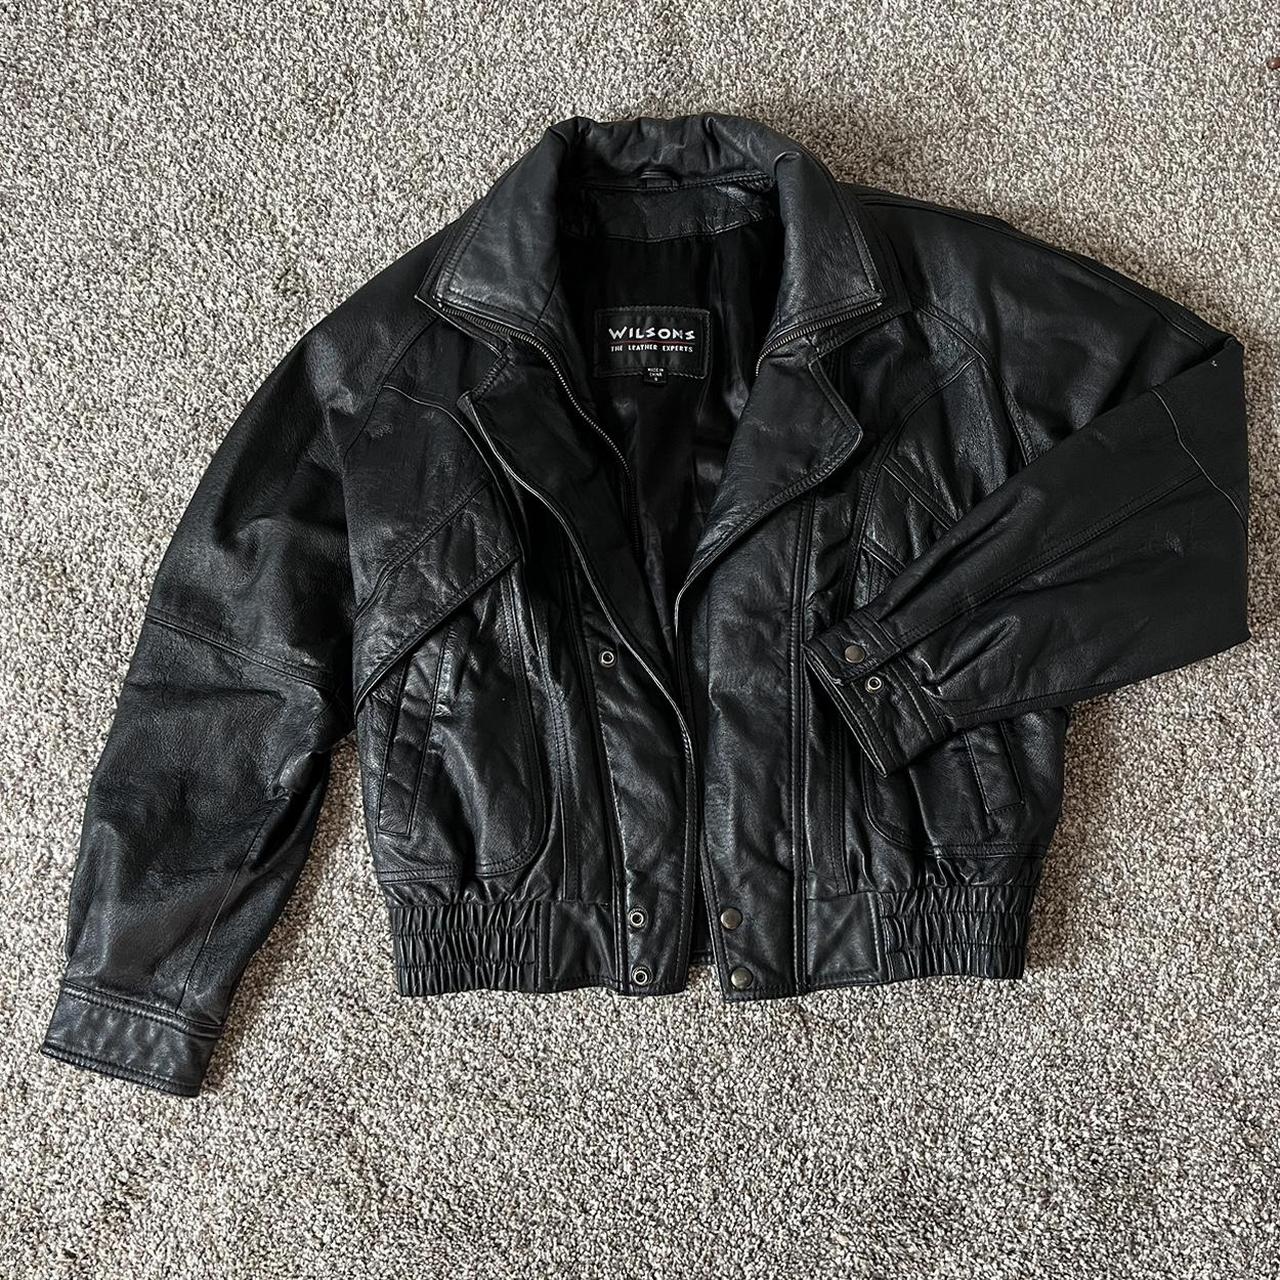 Wilson’s Leather Men's Black and Grey Jacket